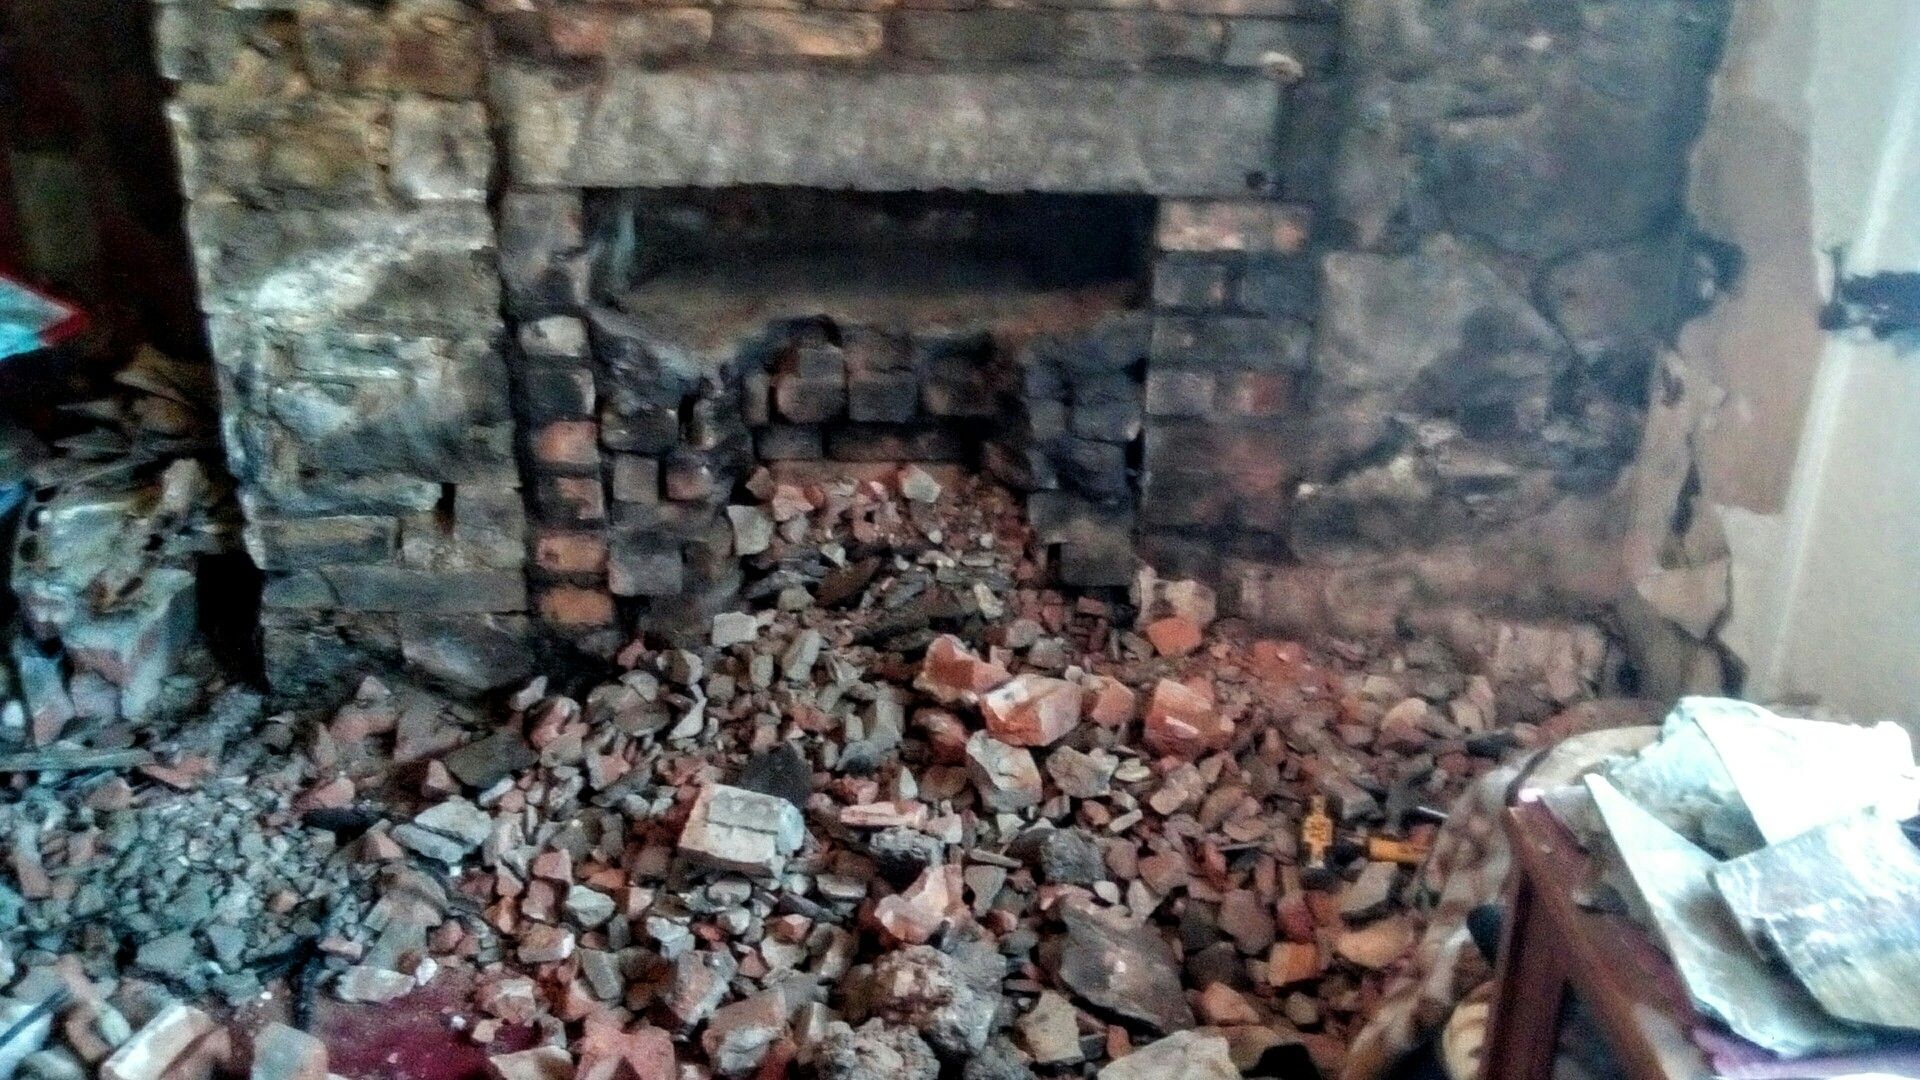 Pebble Fireplace Inspirational 24 8 18 took the Crust Of soot Off Bricks In Fireplace